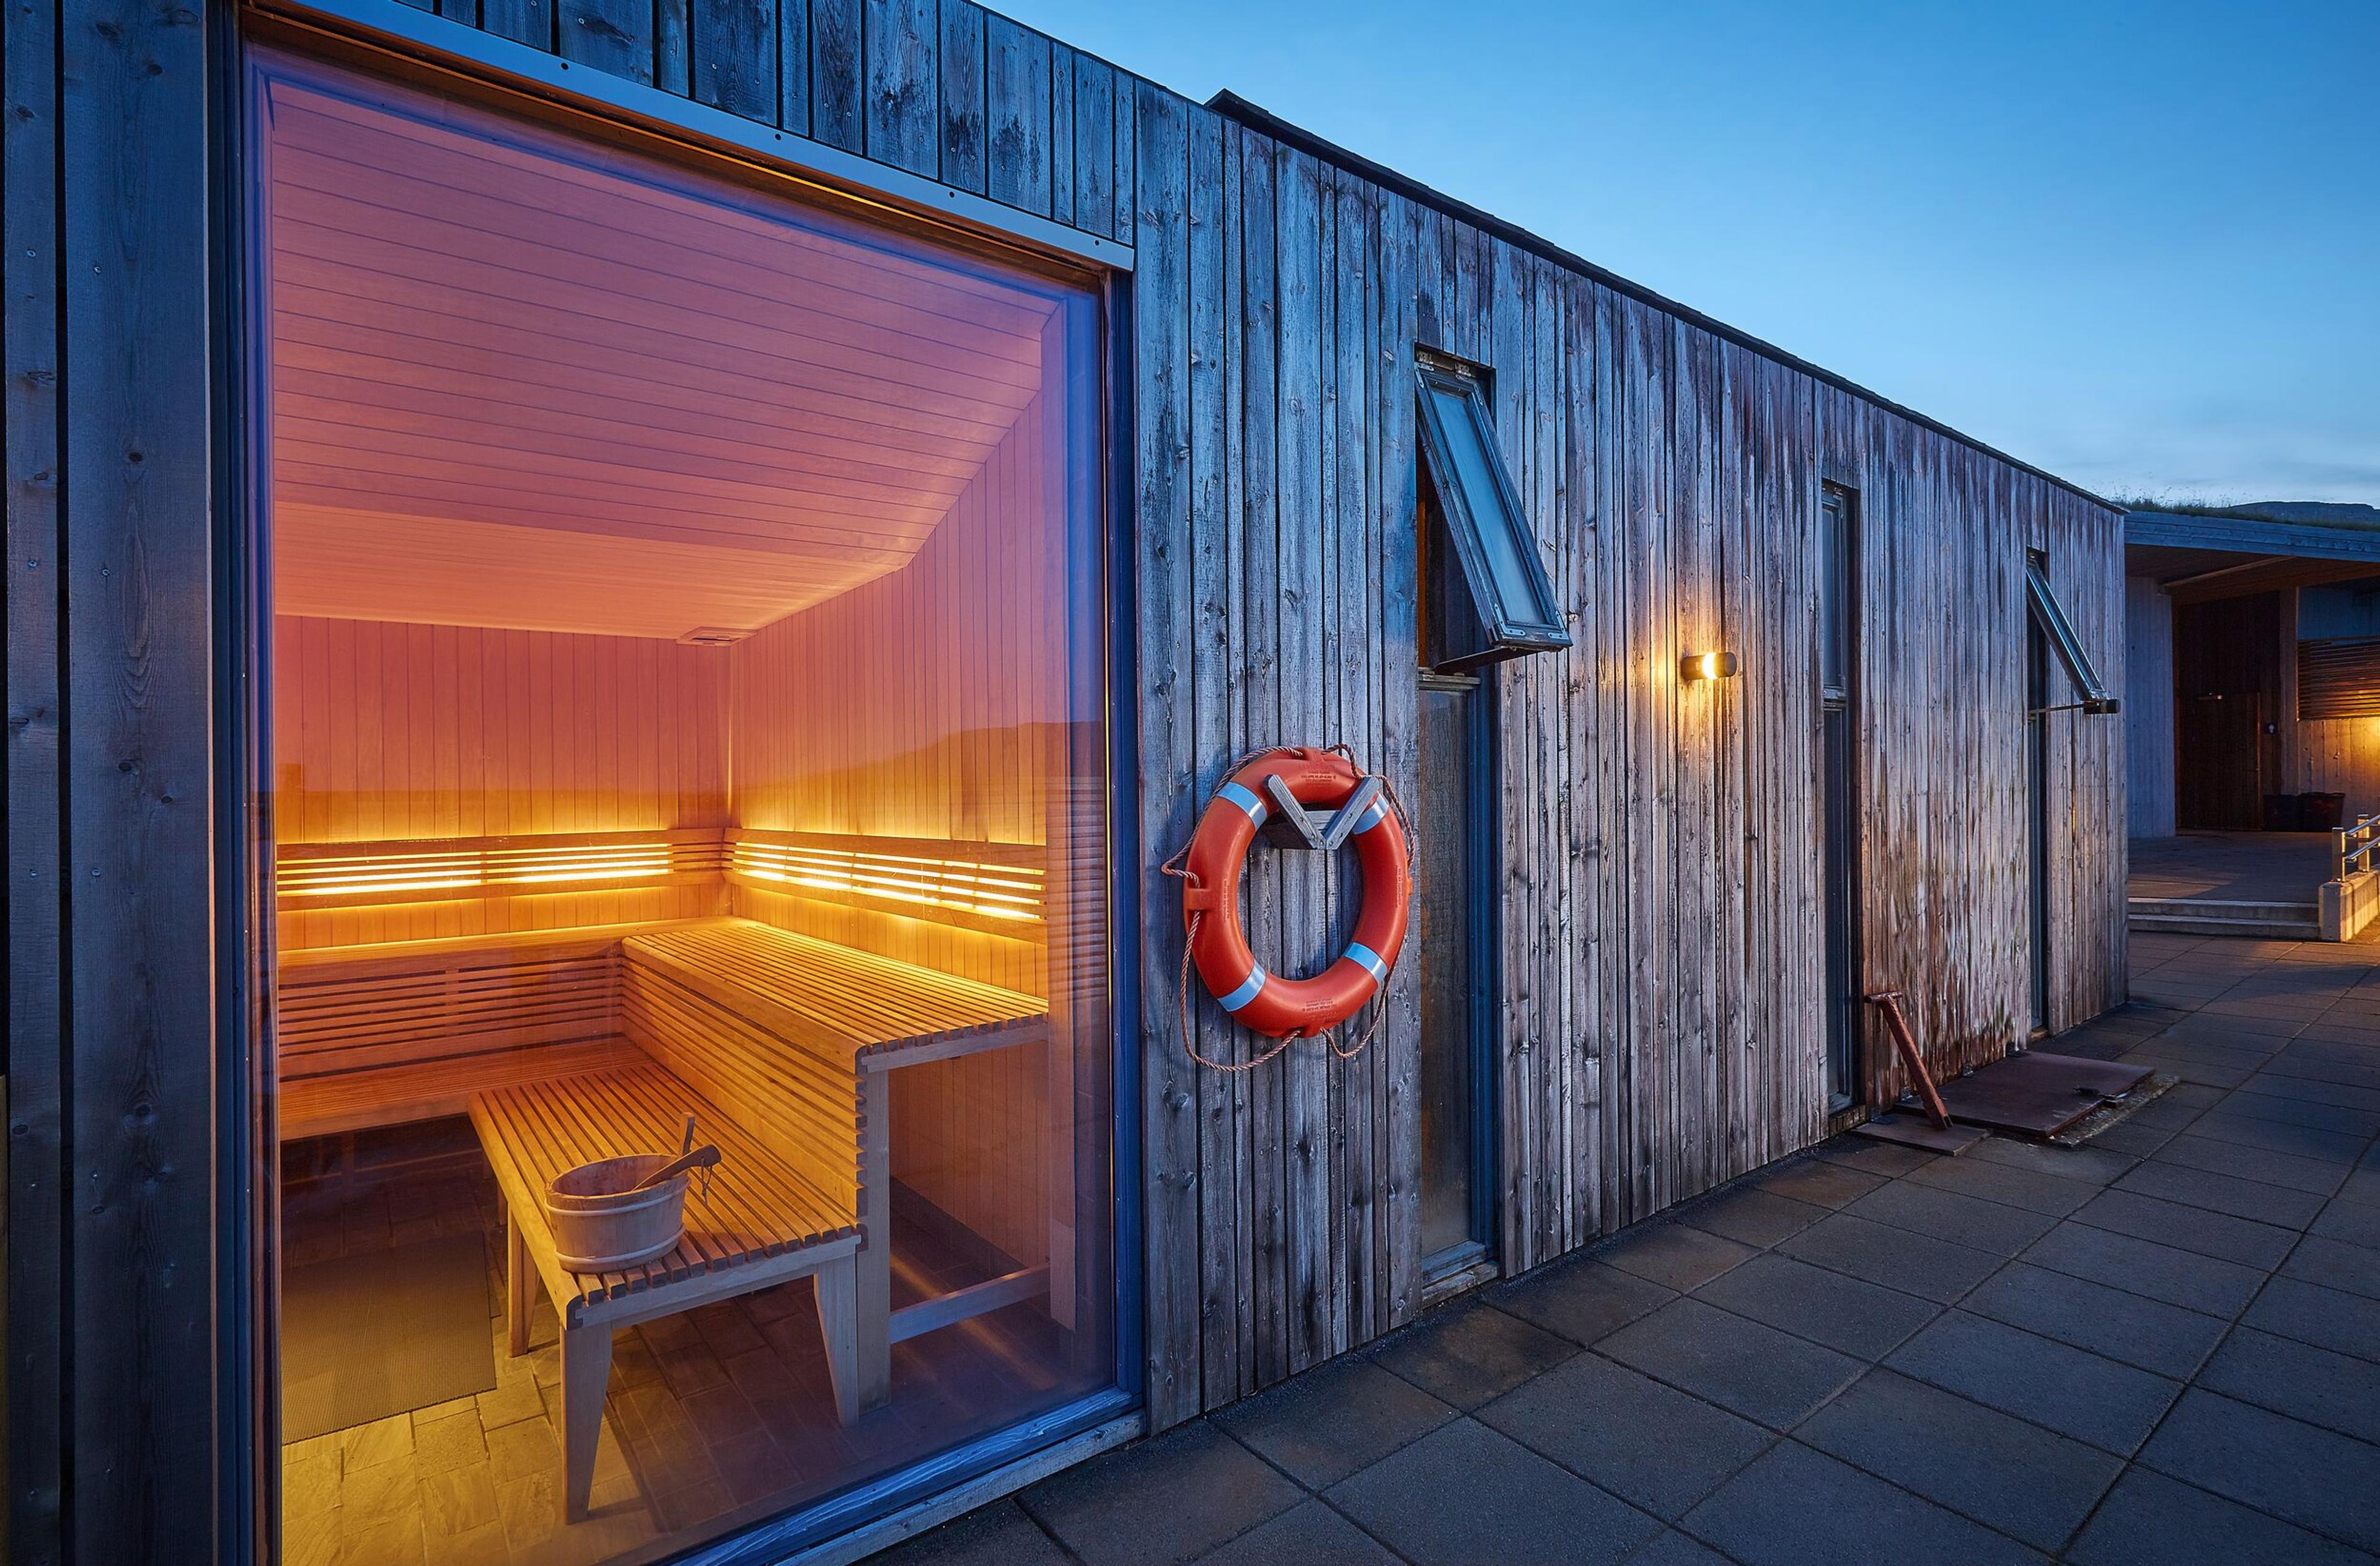 The warm glow of a sauna illuminates the evening as it invites relaxation within its wooden walls, complemented by a rustic exterior and a lifebuoy hanging, suggesting a location near water.